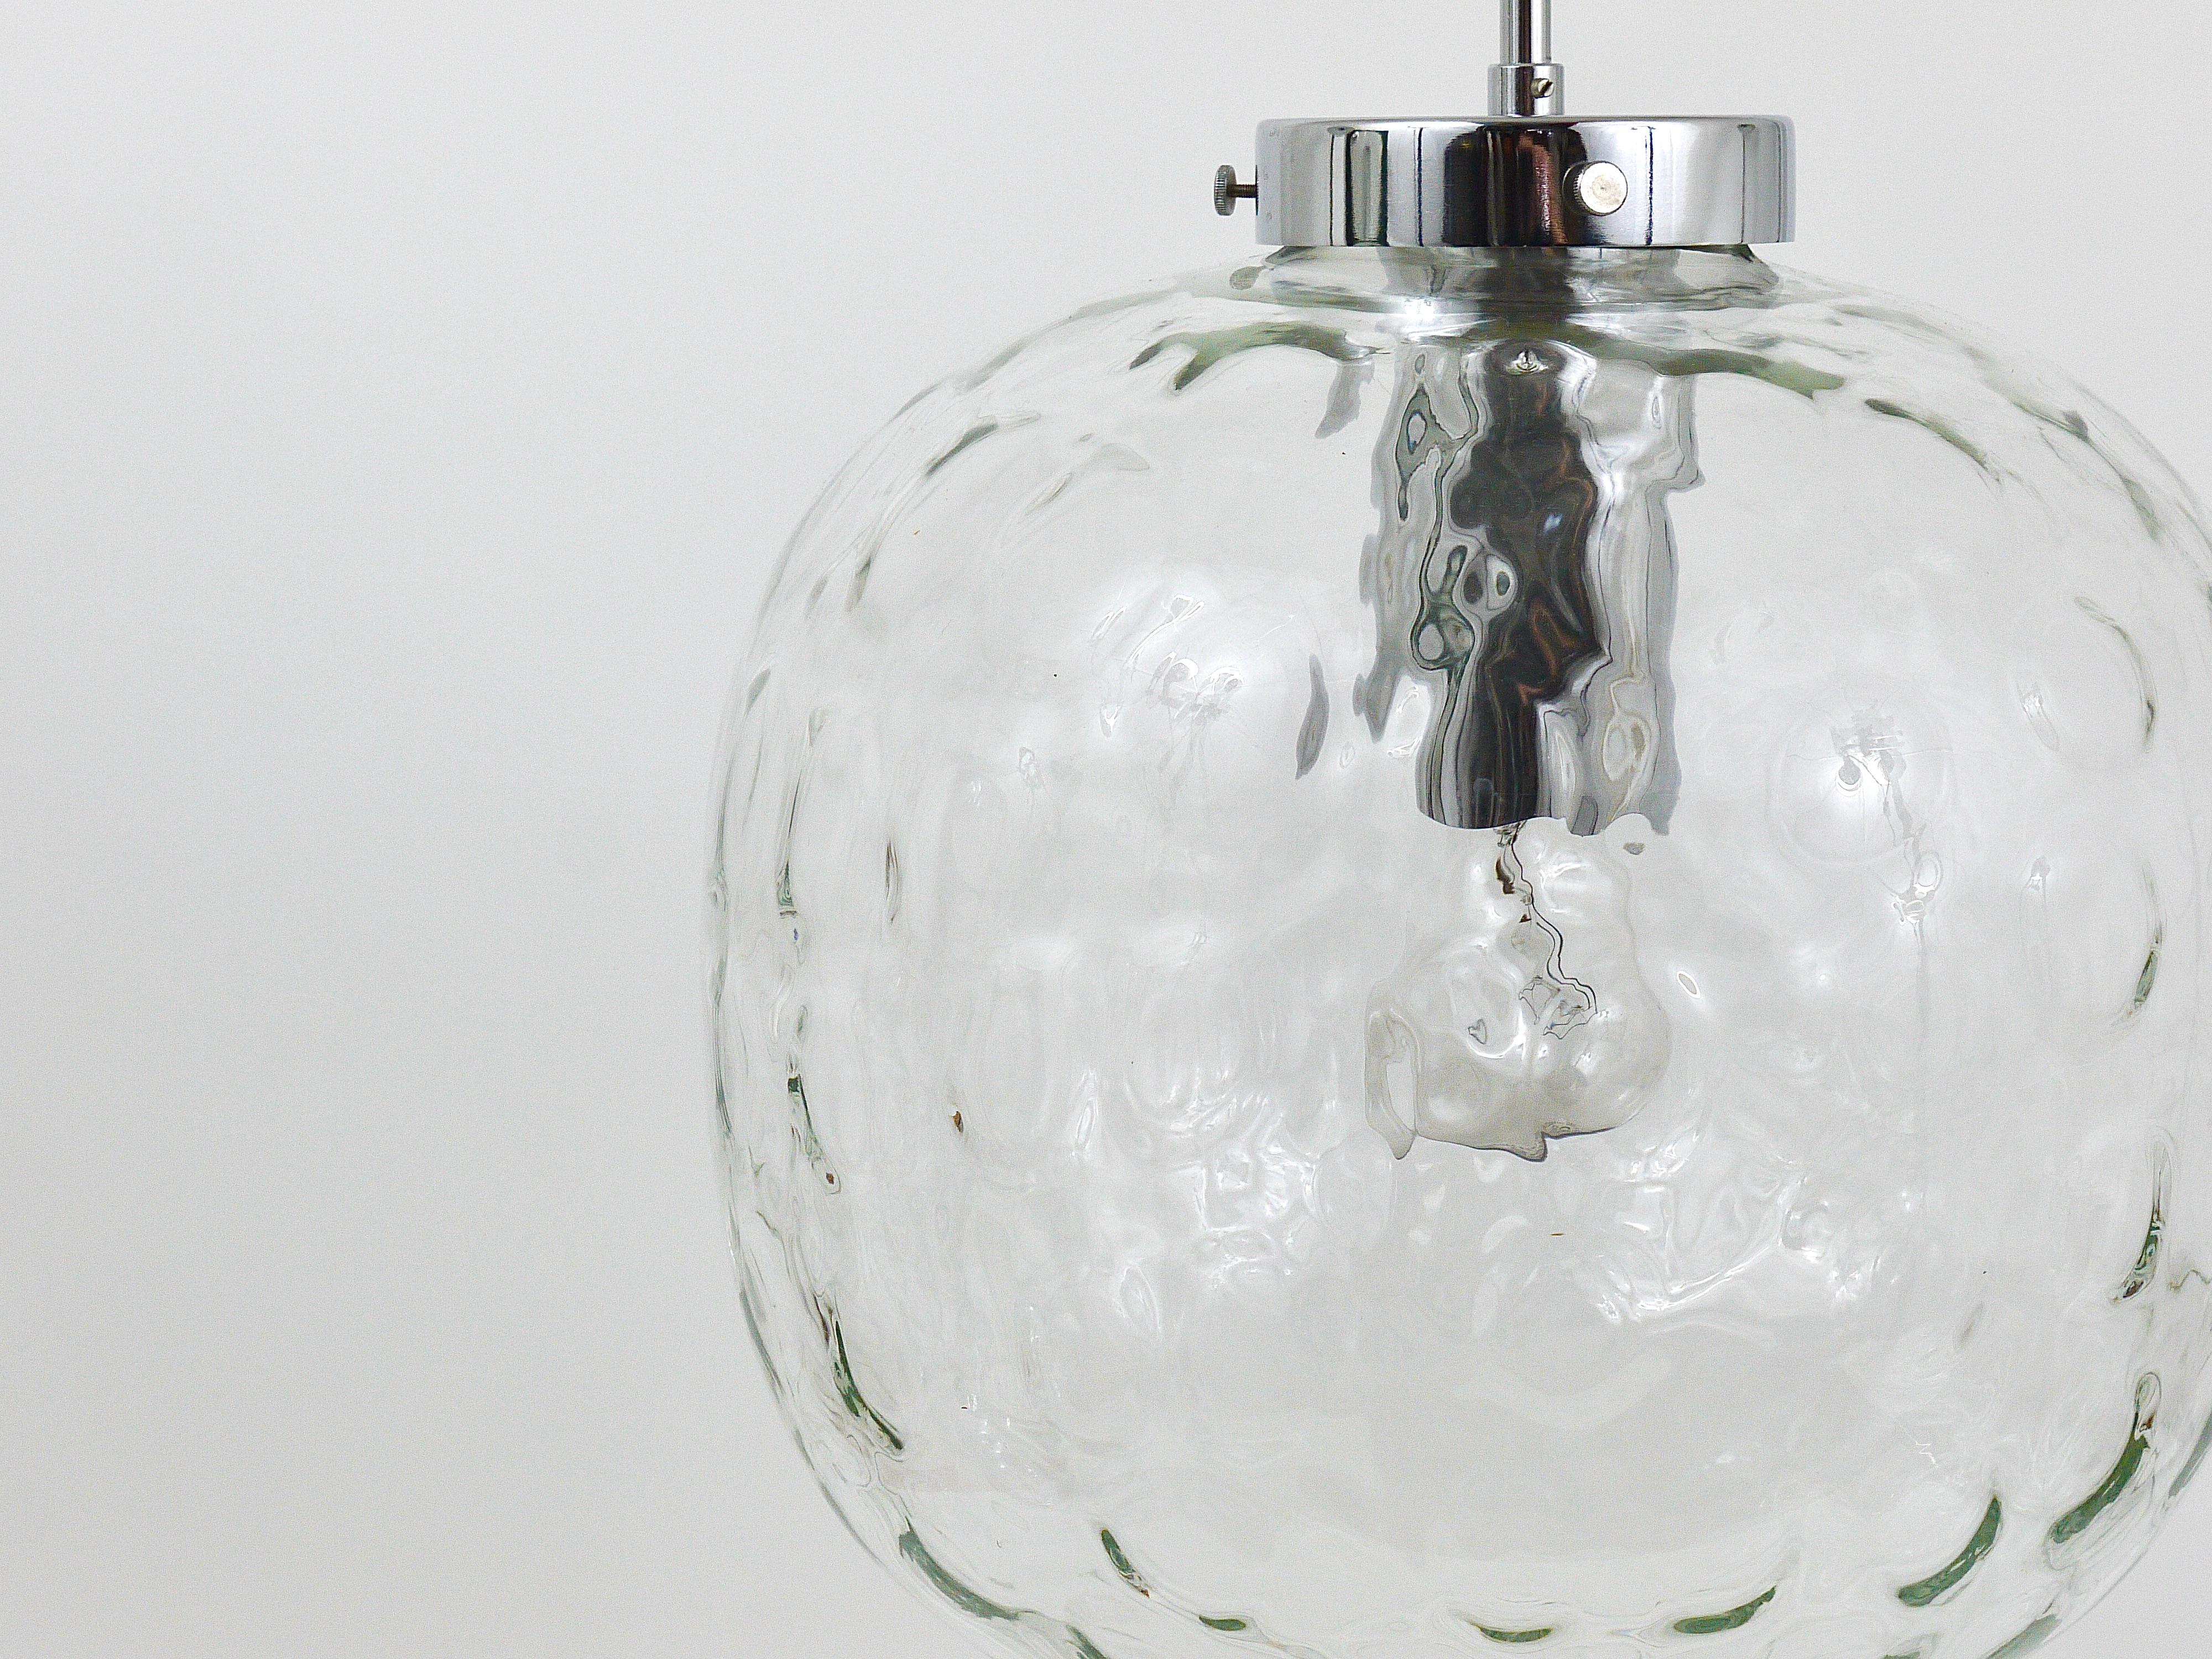 Large Bubble Melting Glass and Chrome Globe Pendant Lamp, Germany, 1970s For Sale 9